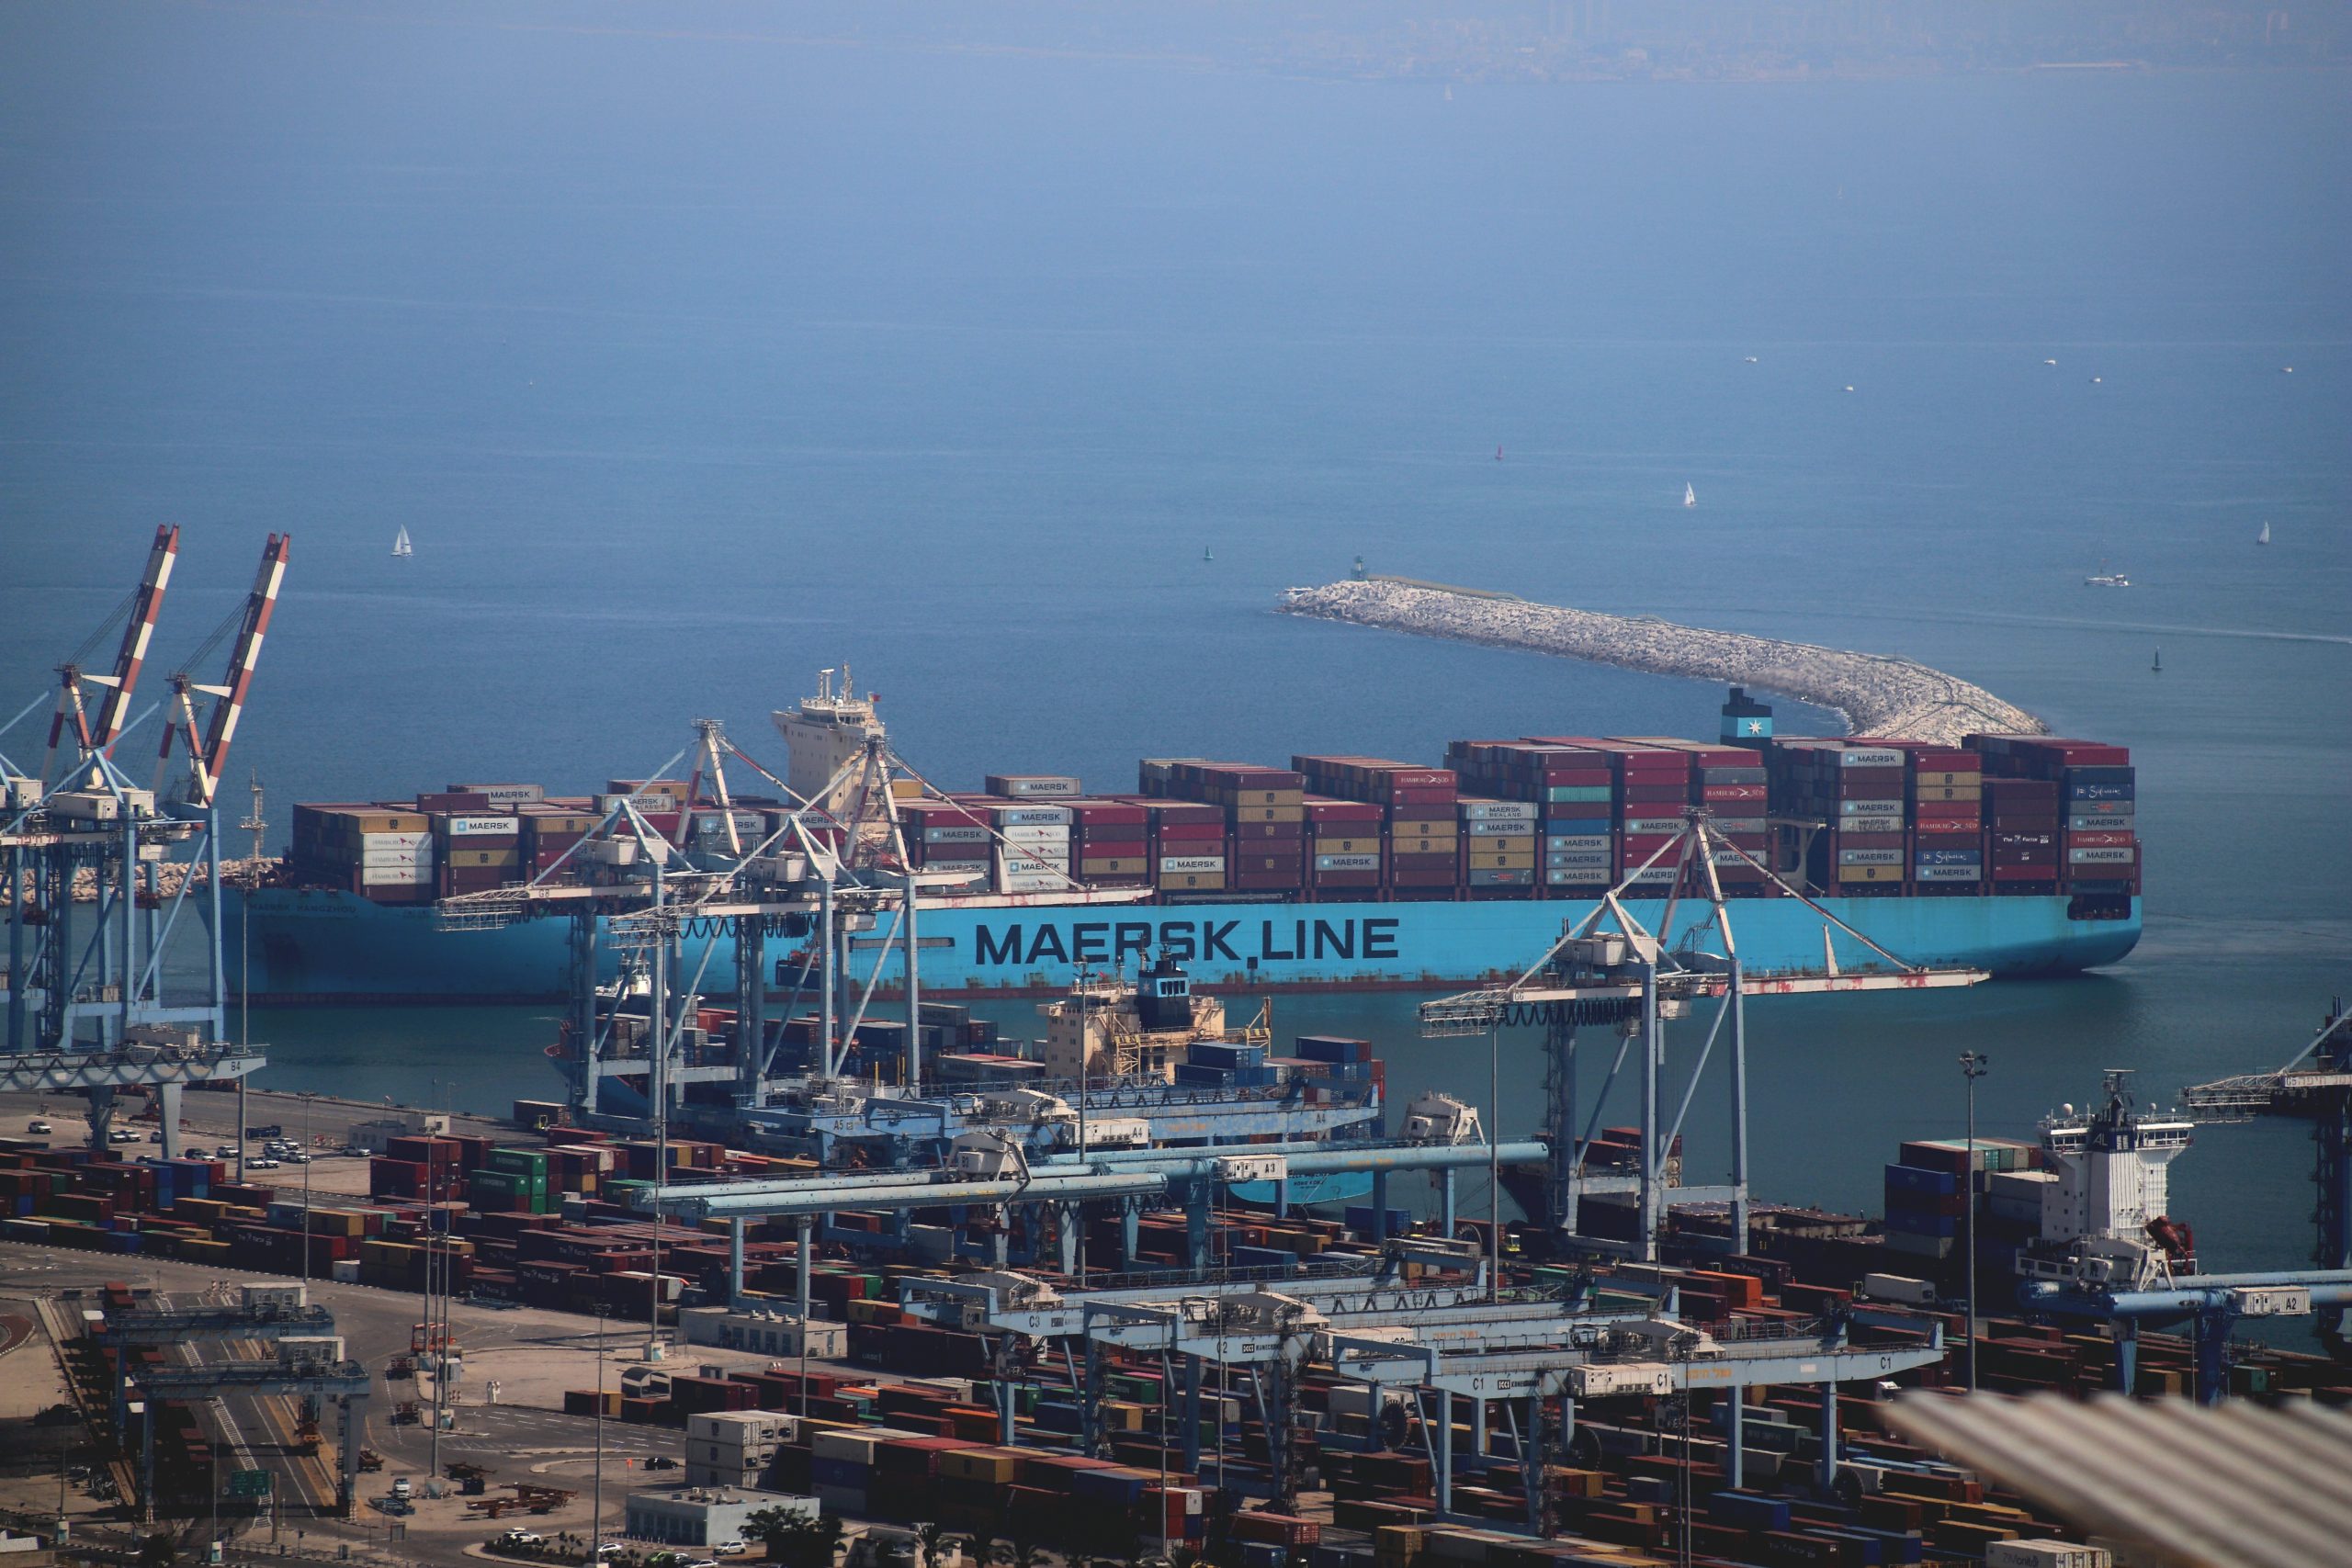 Maersk posted record profits and strengthened its position as the leading global logistics company